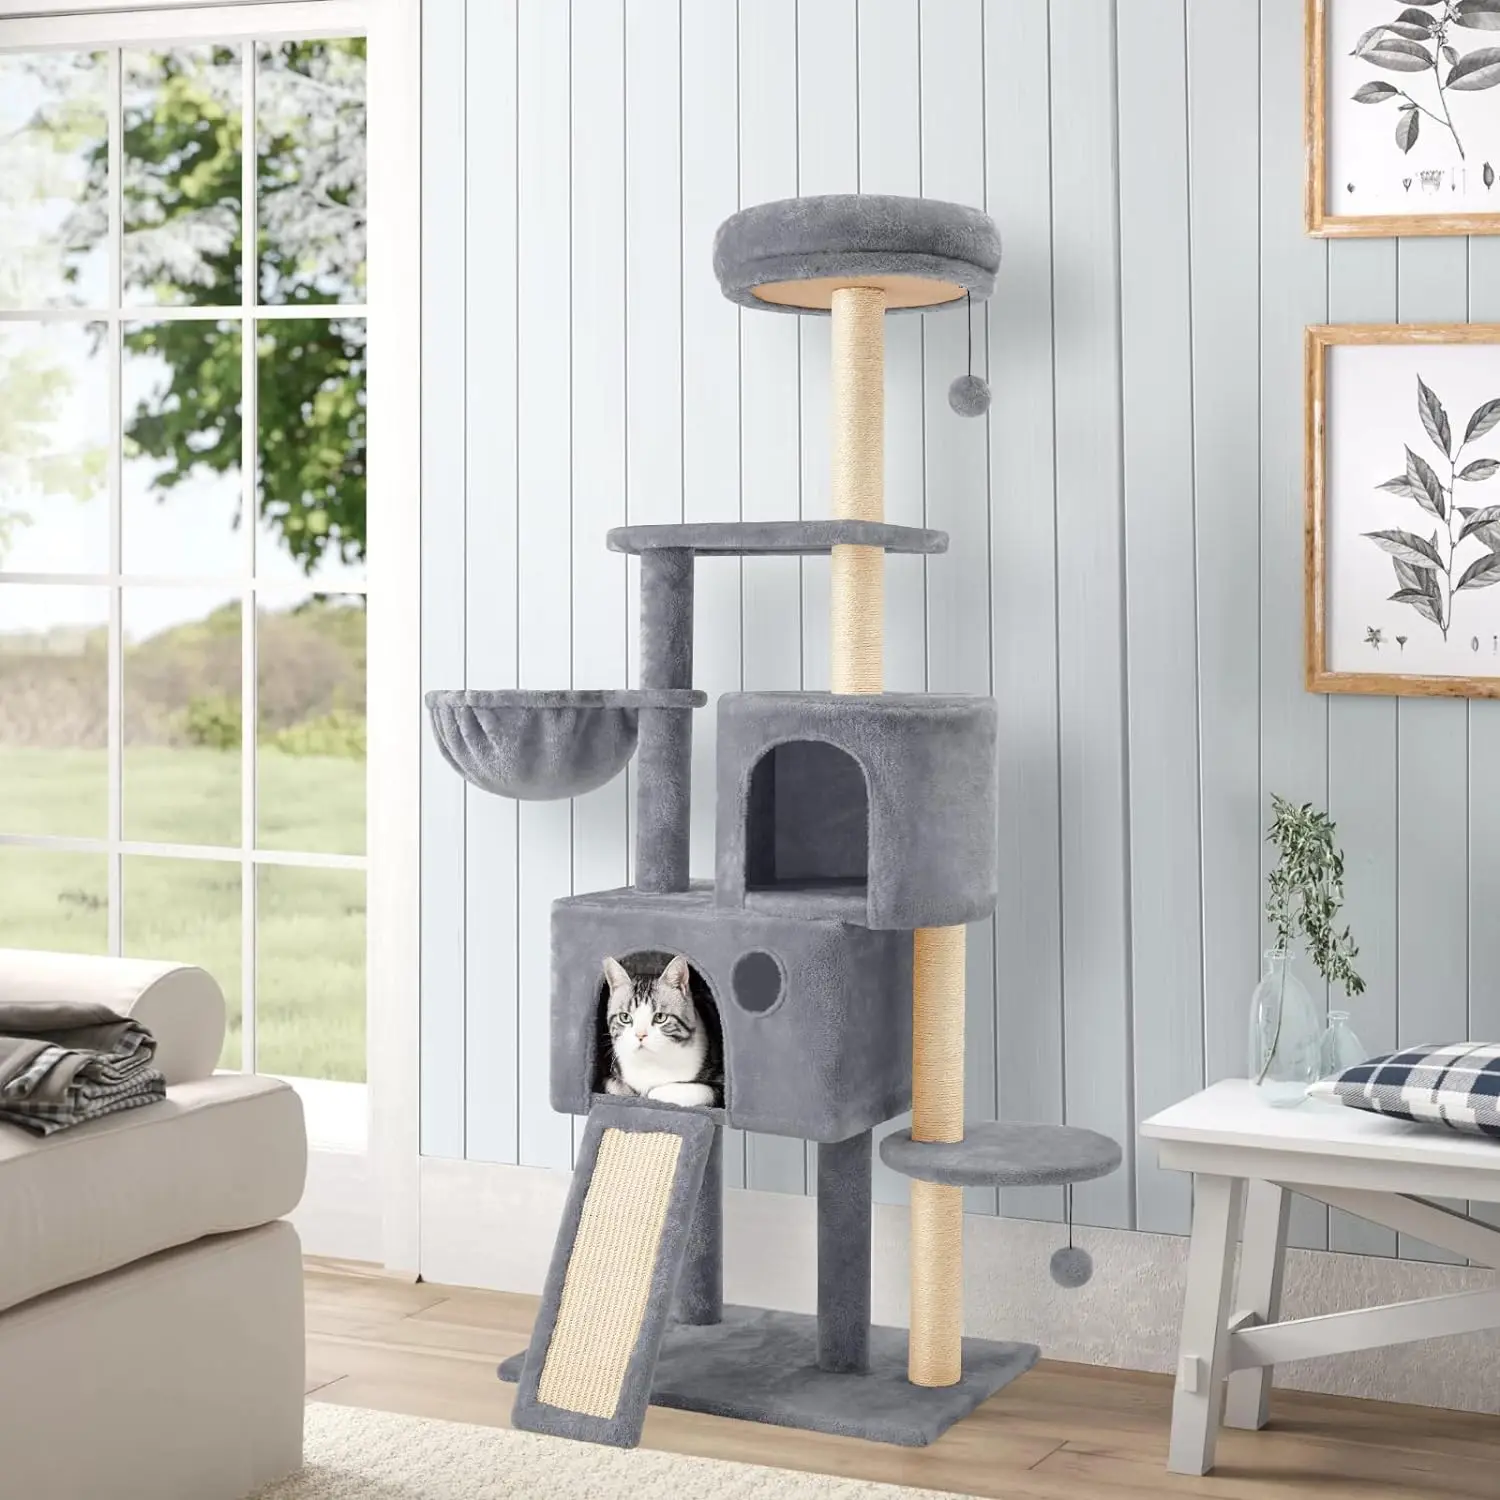 

59" Multi-Level Cat Tree Cat Tower for Indoor Cats, Tall Plush Rest Area with Spacious Cat Condos, Scratching Posts with